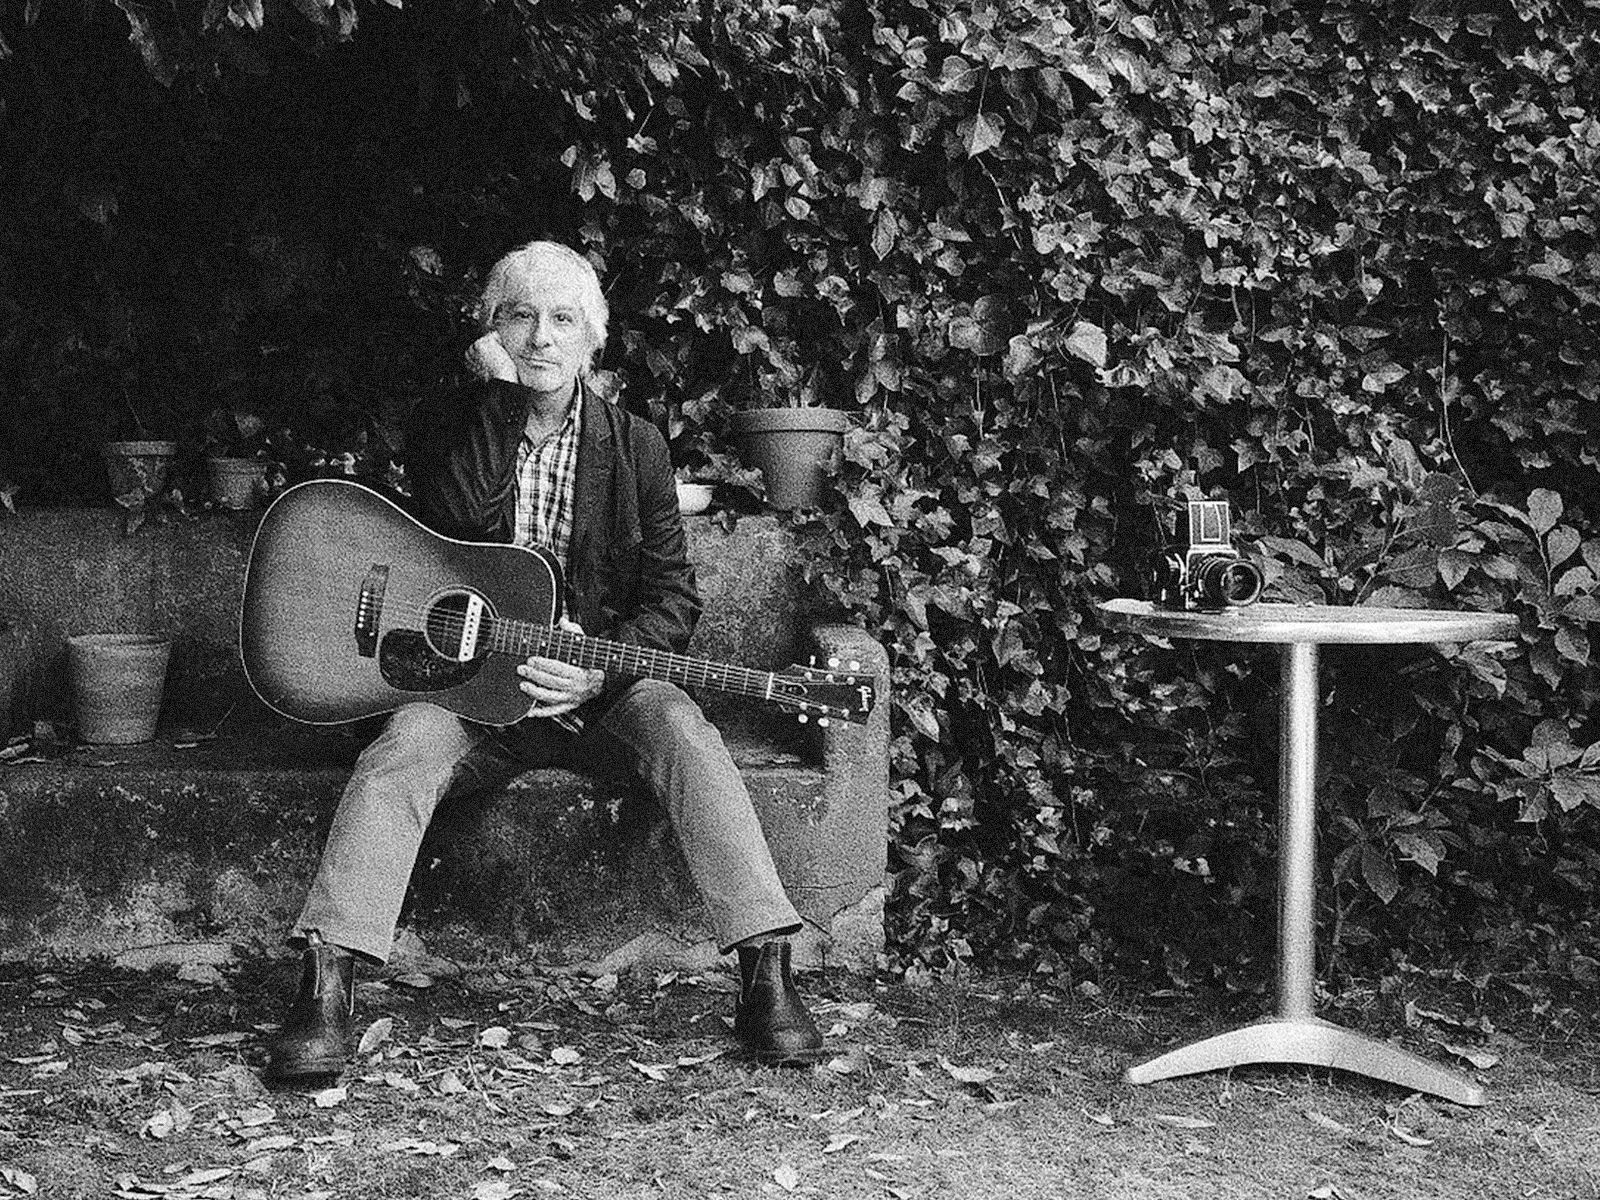 Lee Ranaldo sitting with his guitar on a stone bench.